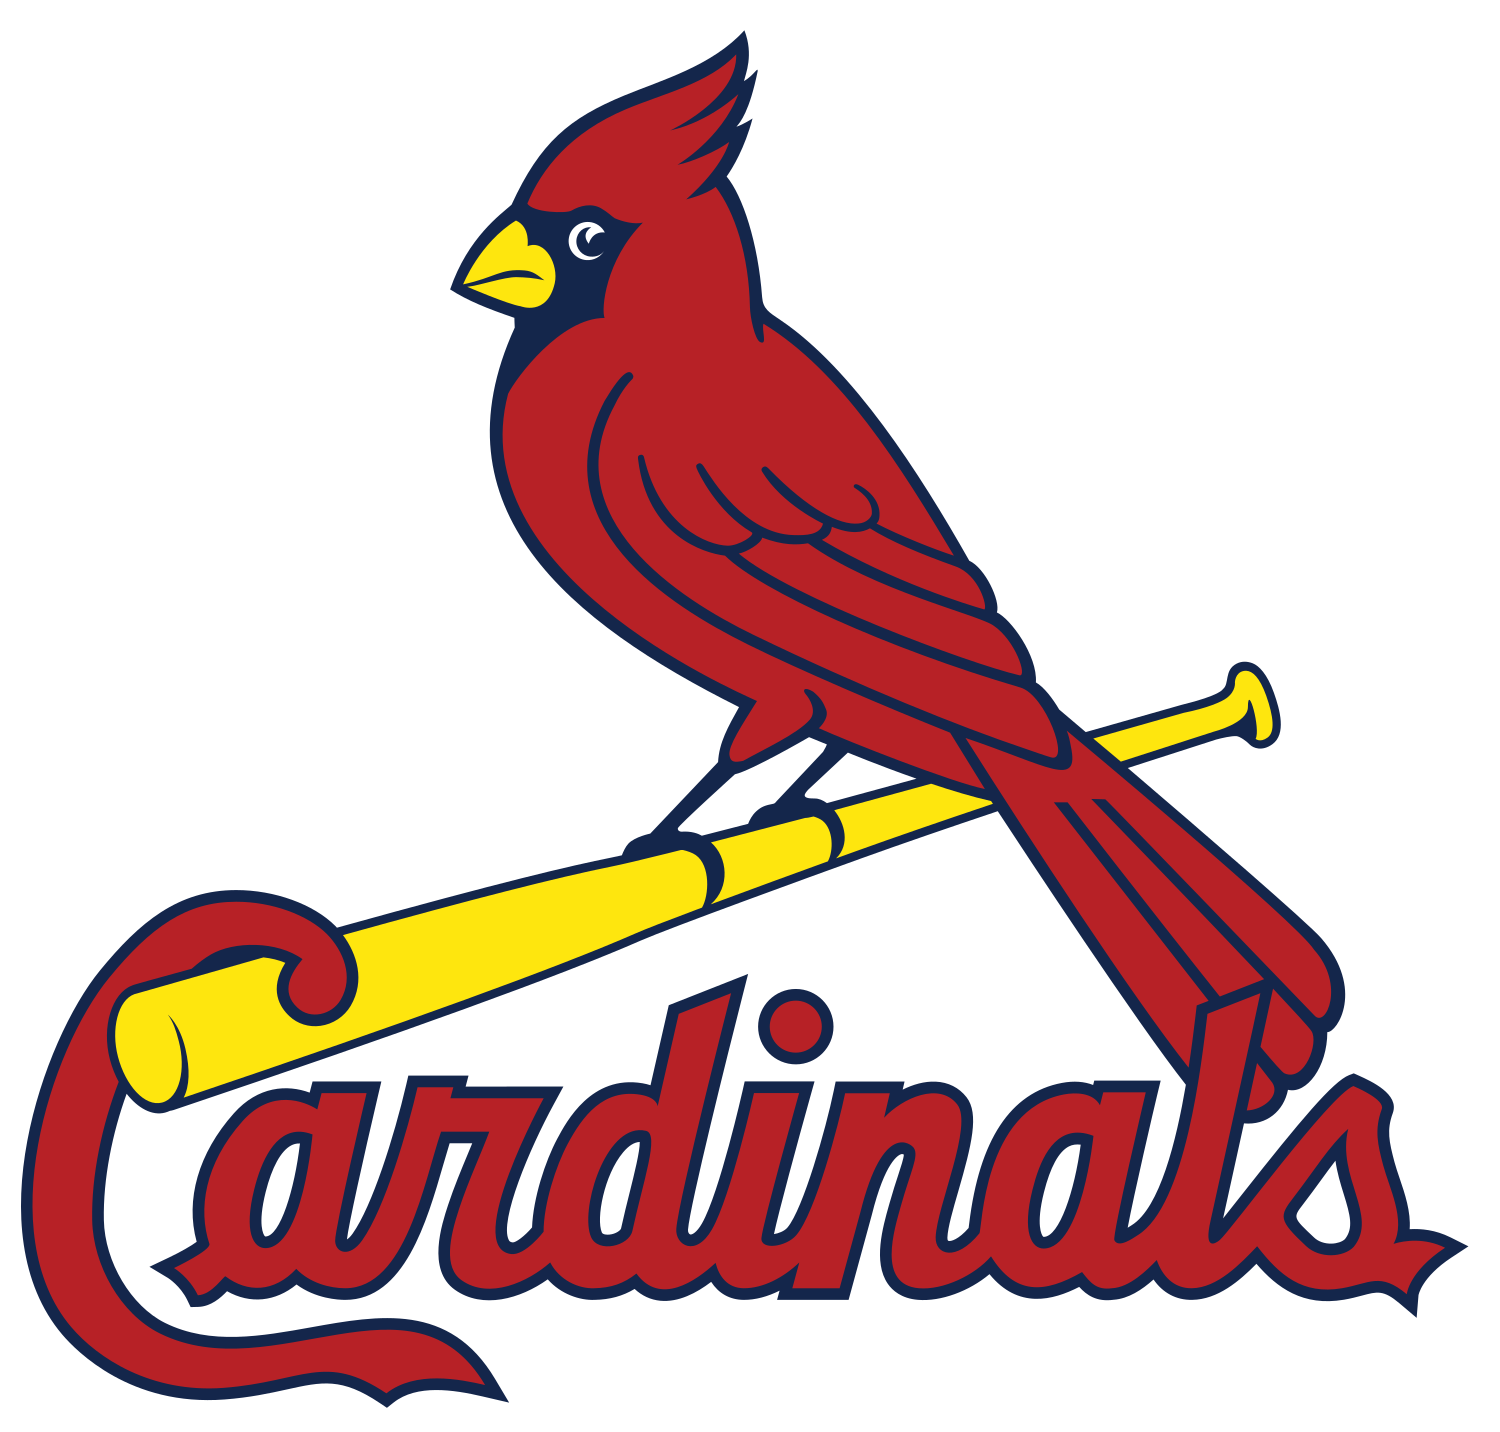 Bernie On The Cardinals: As Spring Training Heats Up, Let's Rank